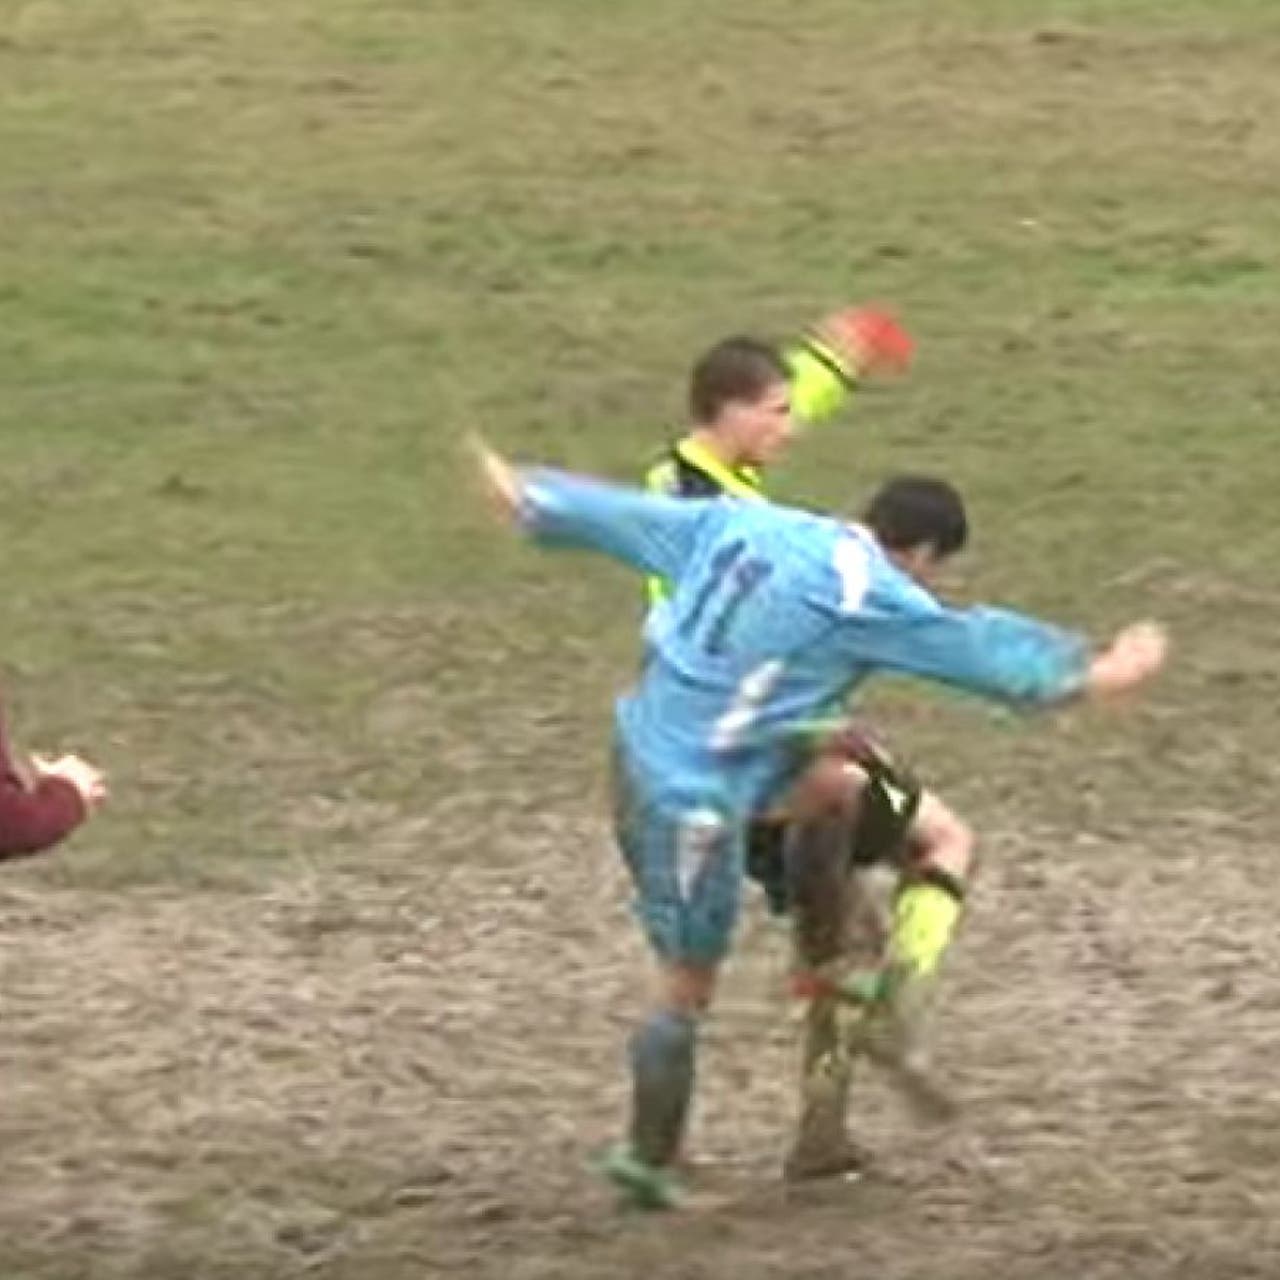 Italian referee kicked by sent-off player in lower league match, The  Independent